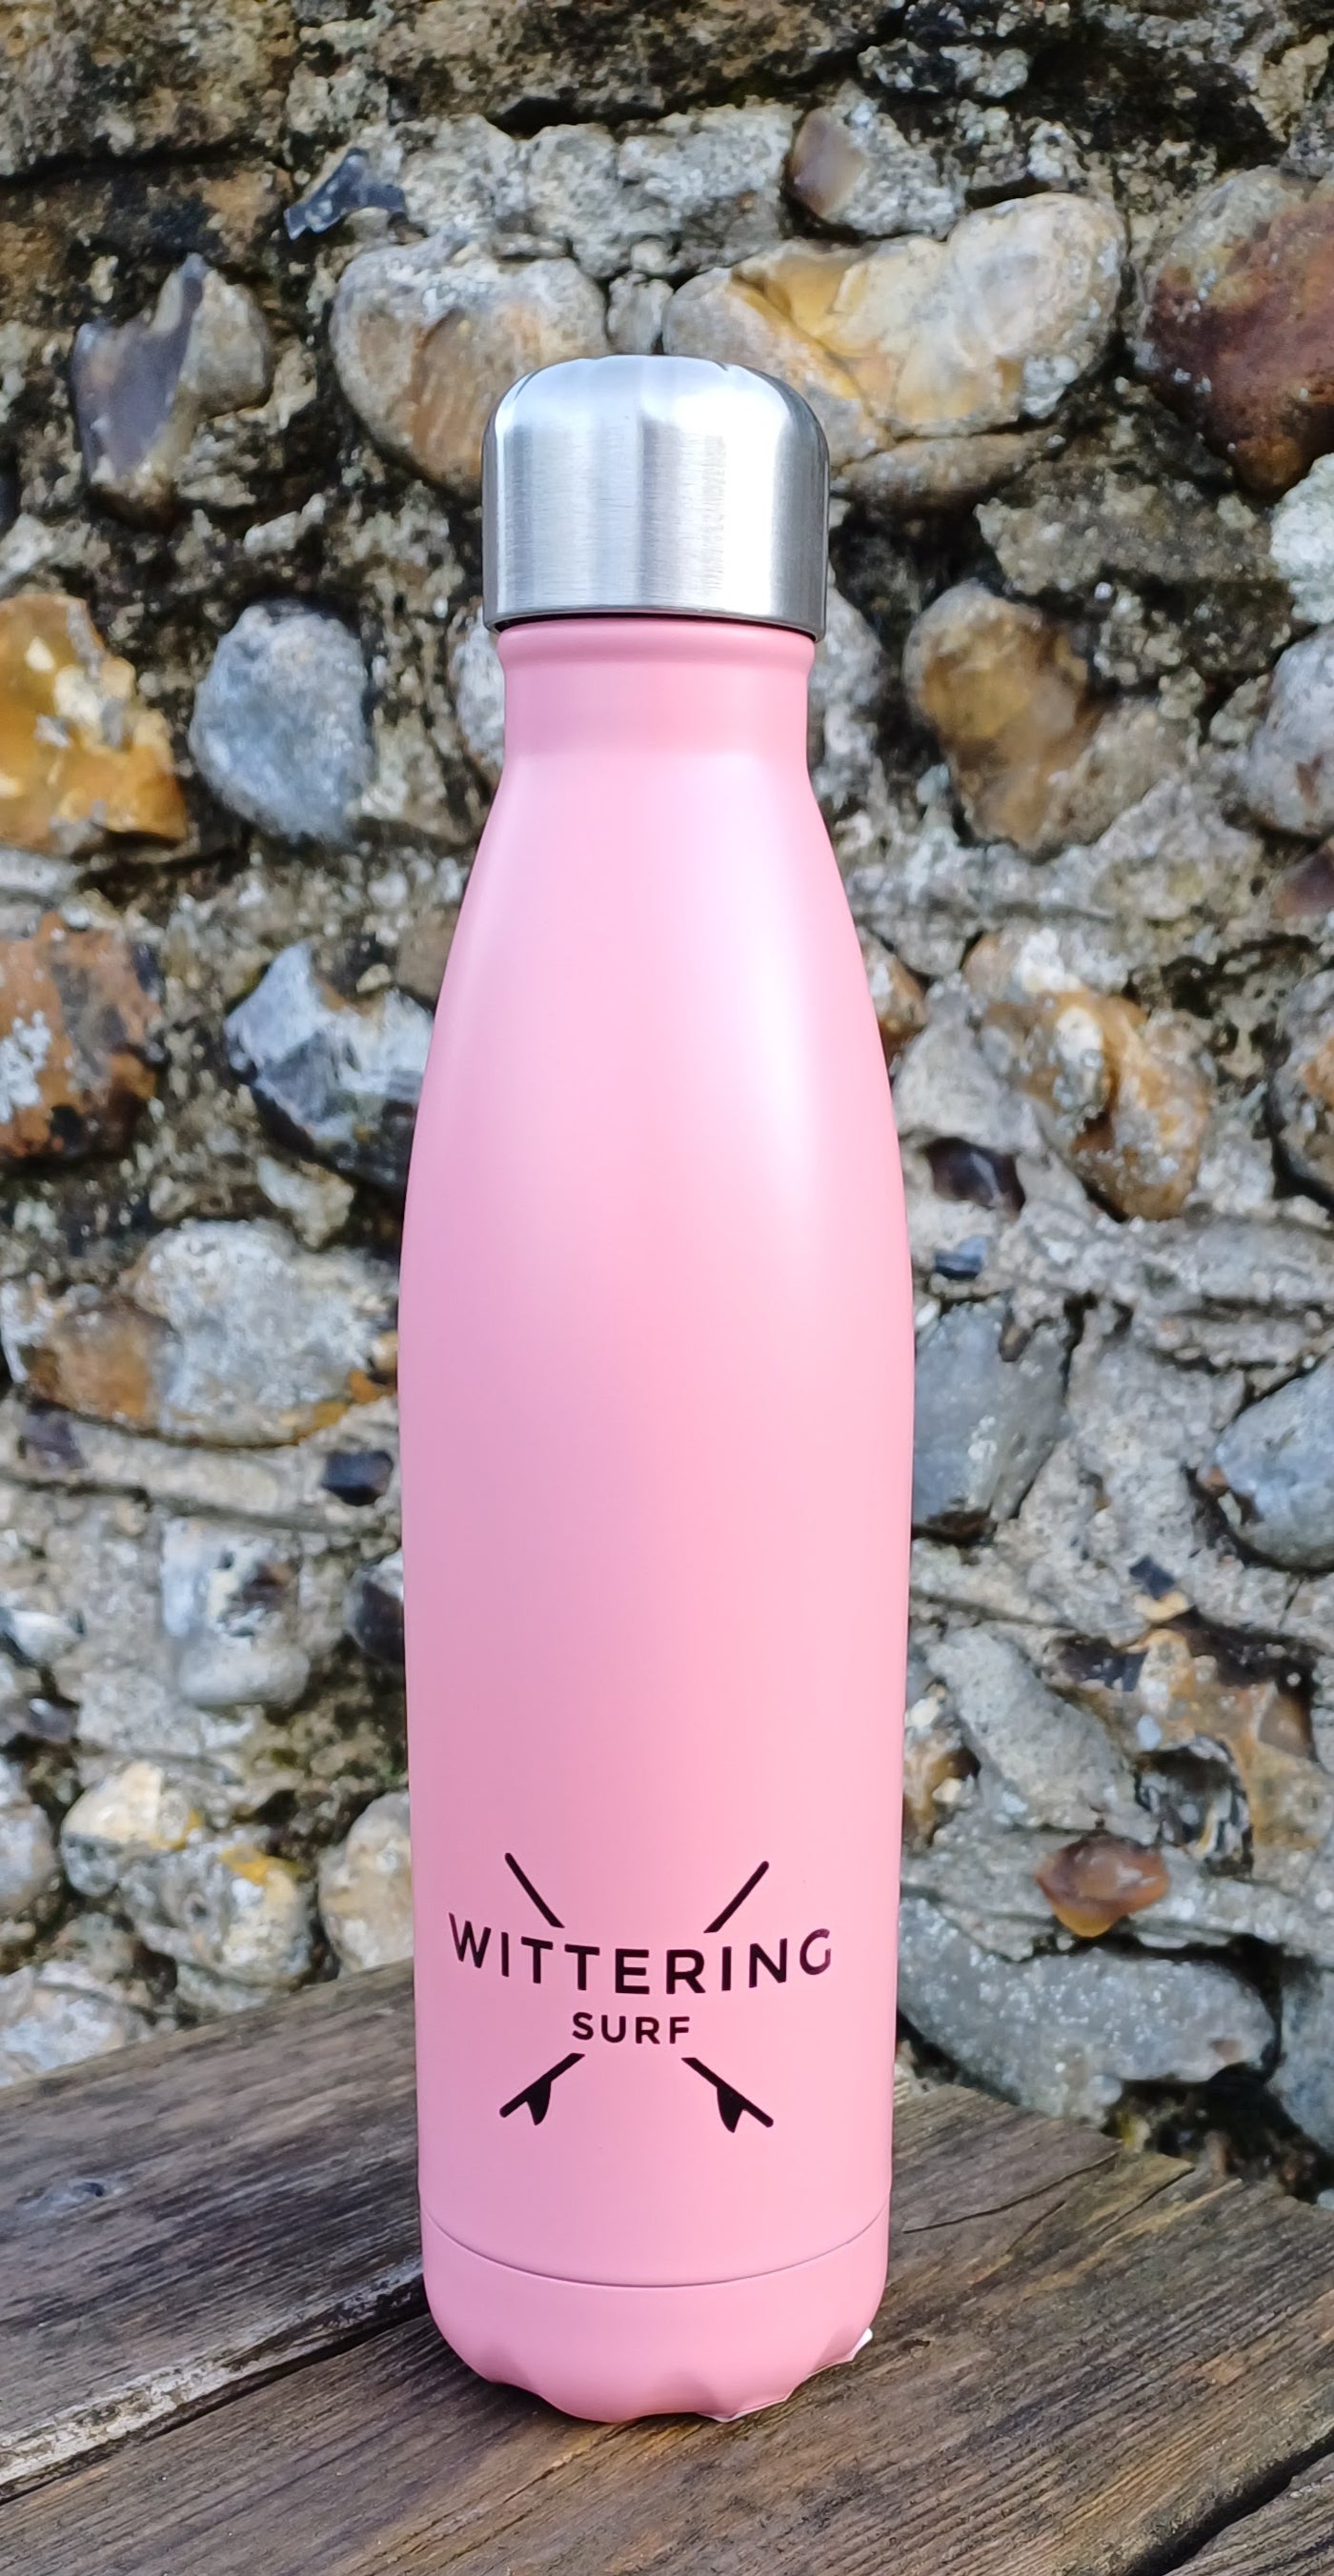 STAINLESS STEEL WATER BOTTLE - Mint Green/Candy Pink/White/Stainless Steel/Hot Pink/Aqua Fusion